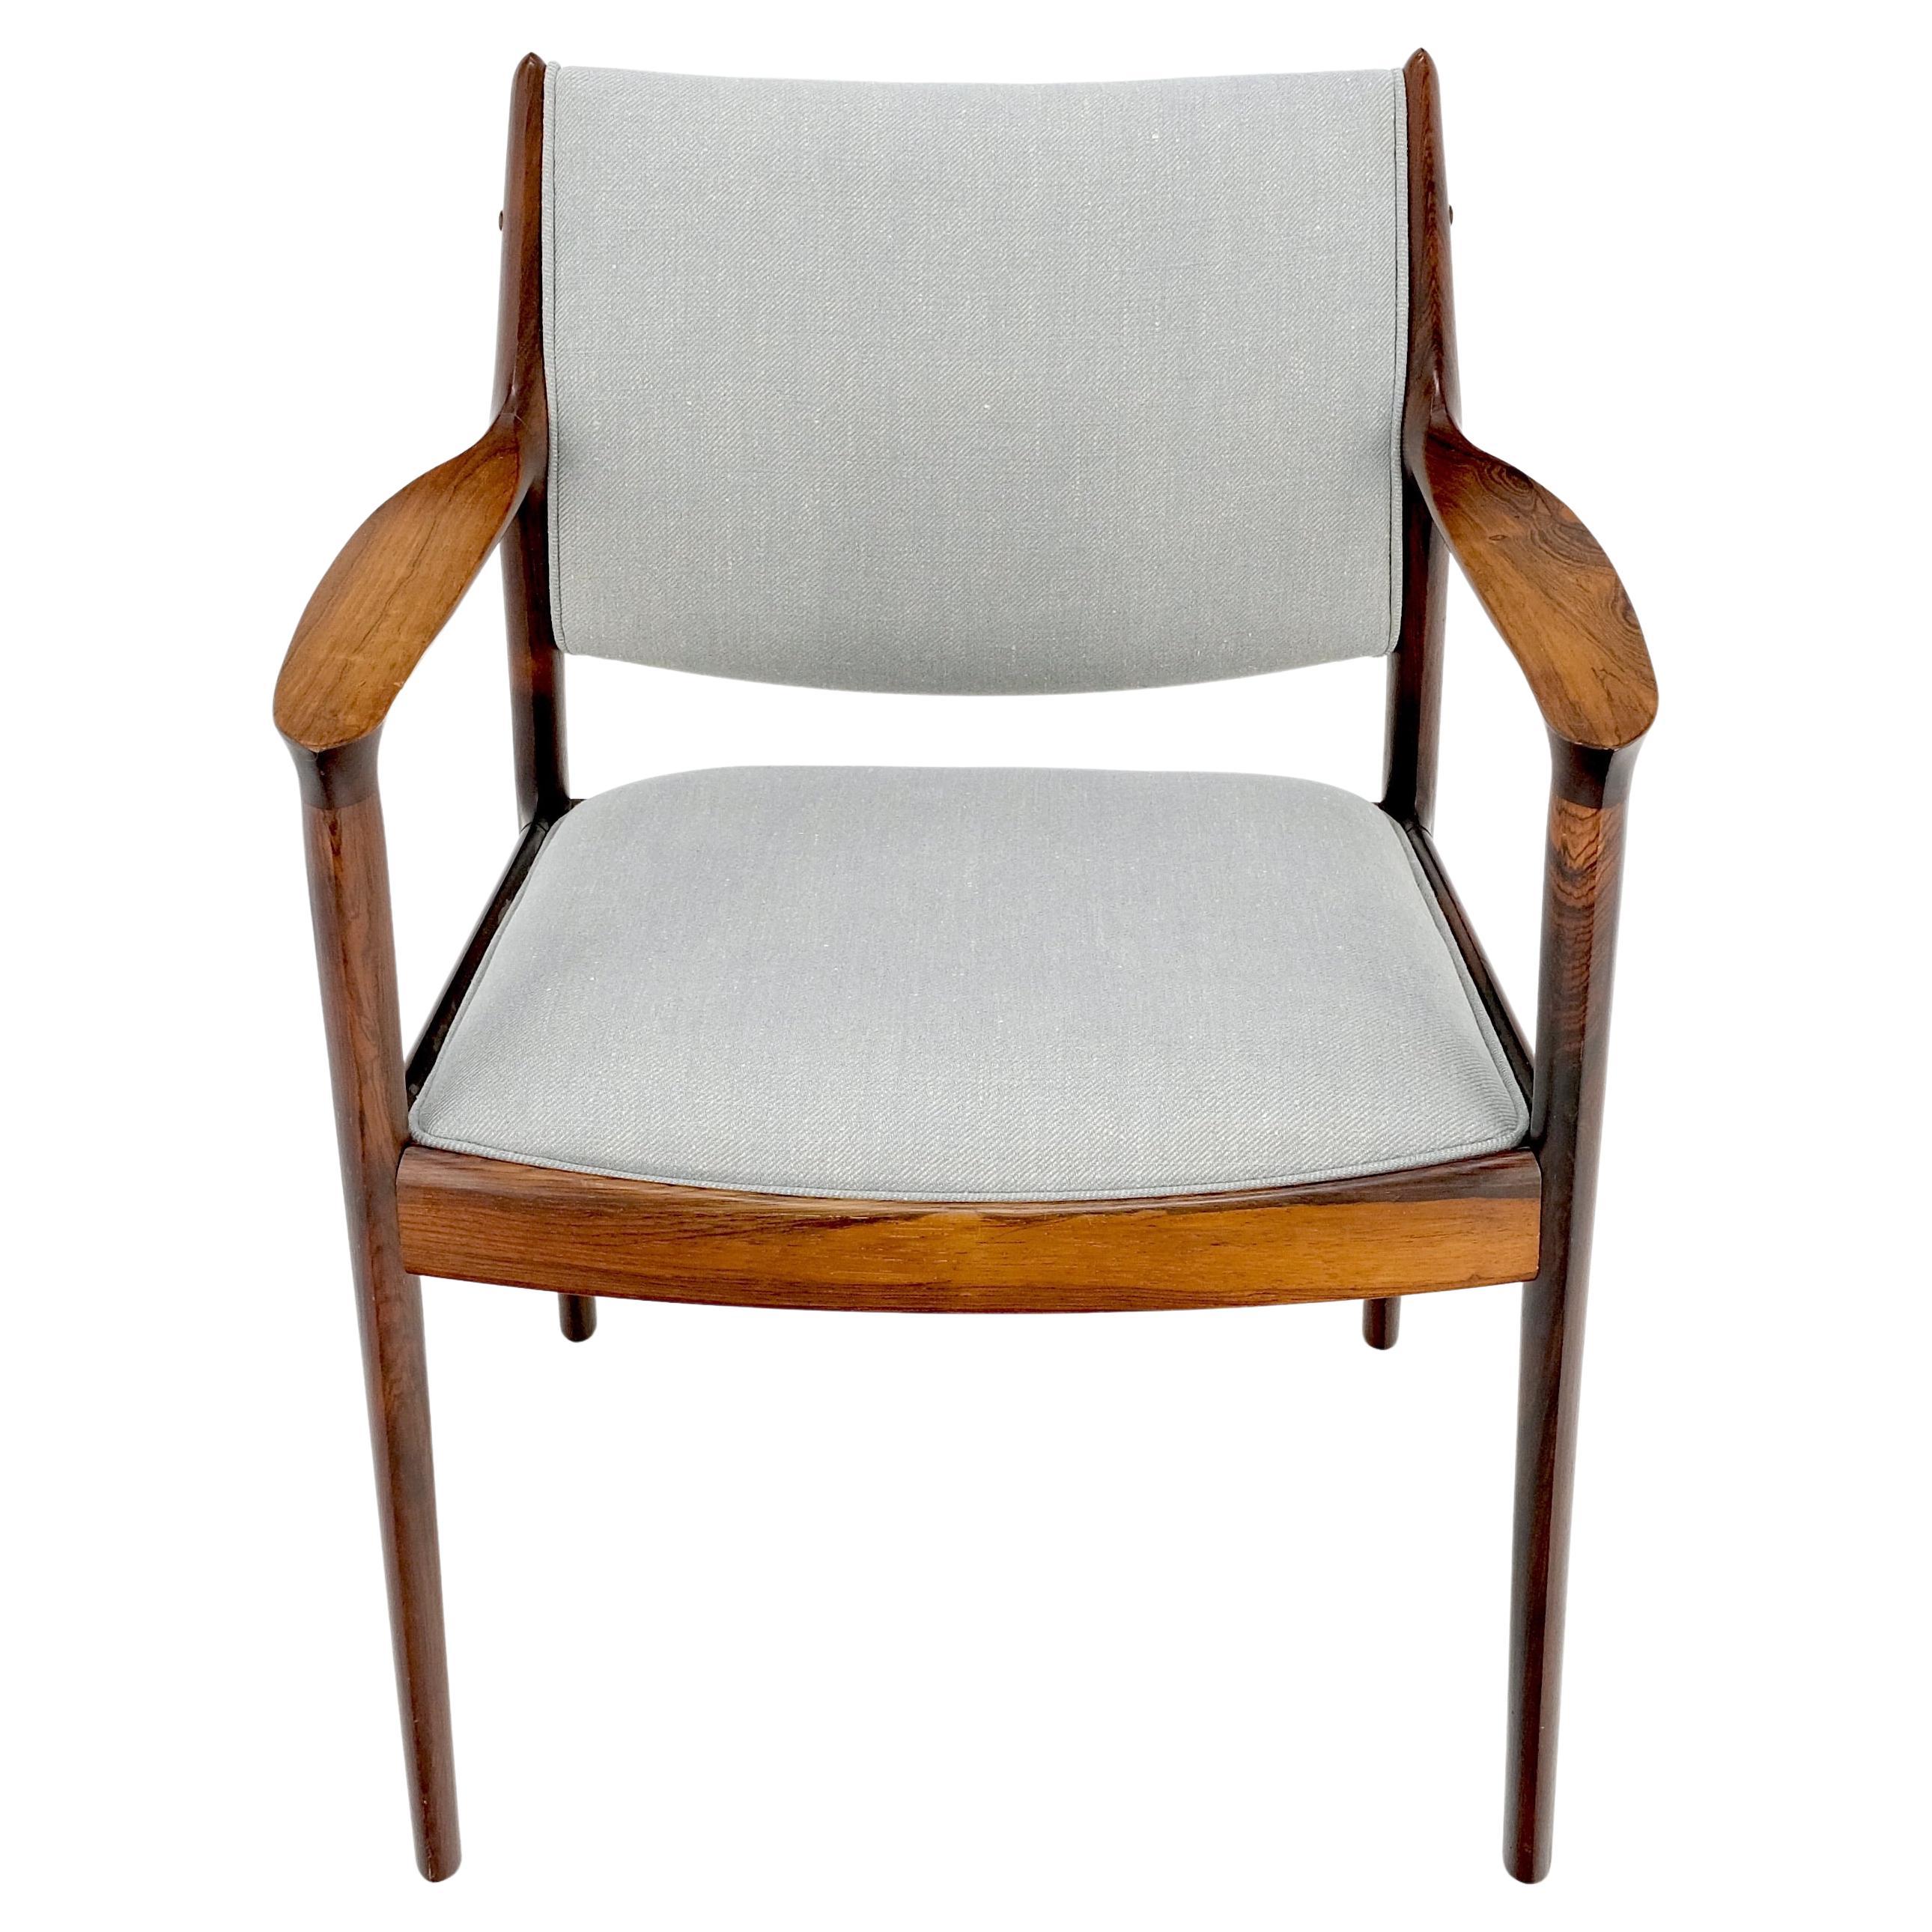 American Solid Rosewood New Upholstery Danish Mid-Century Modern Side Office Desk Chair